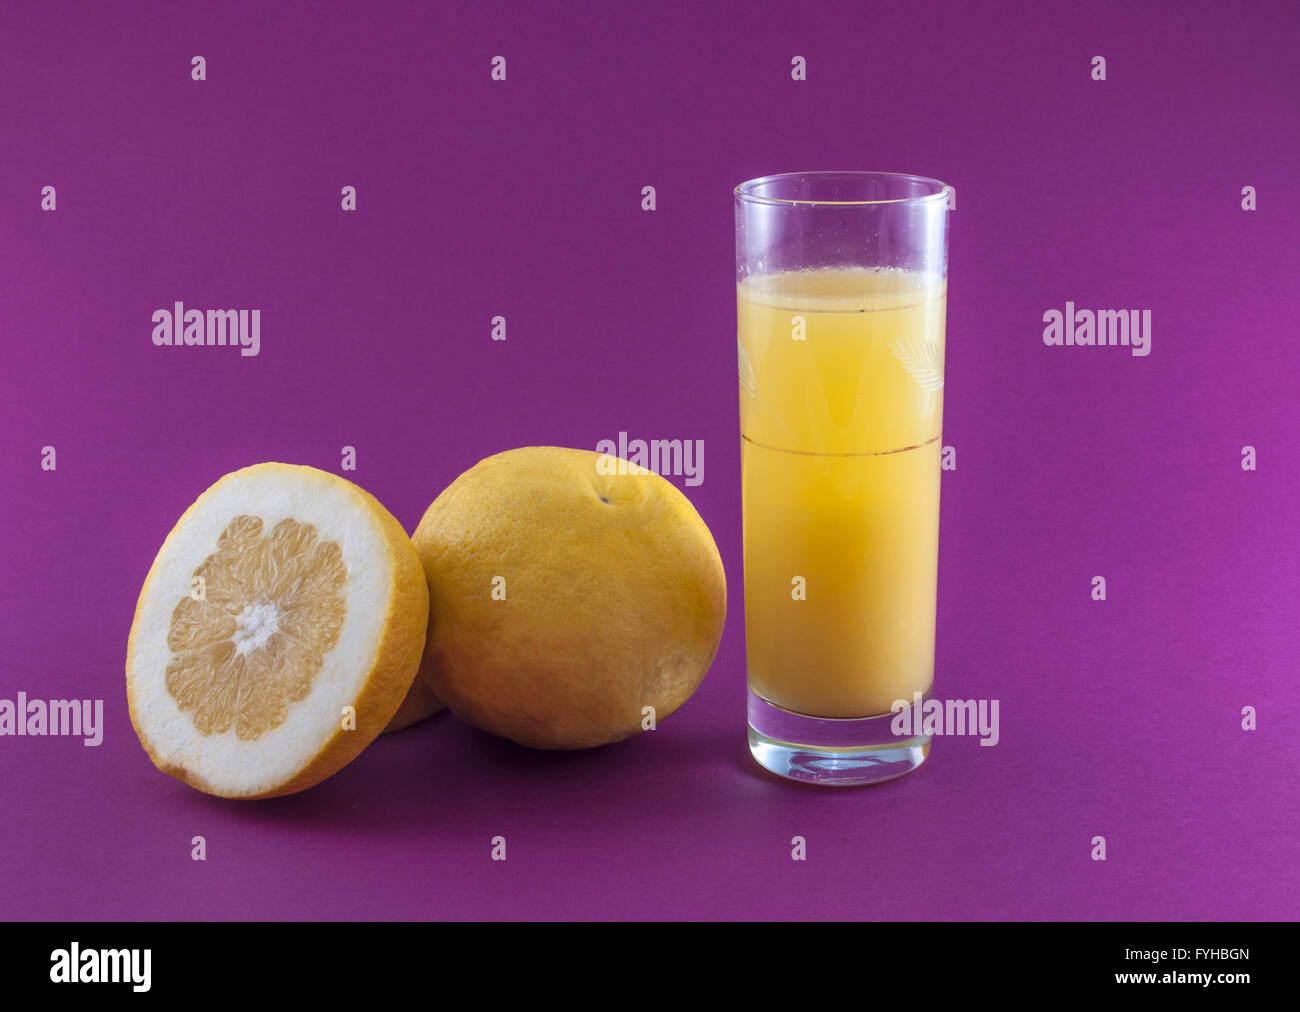 grapefruit juice and fruit on colored background Stock Photo